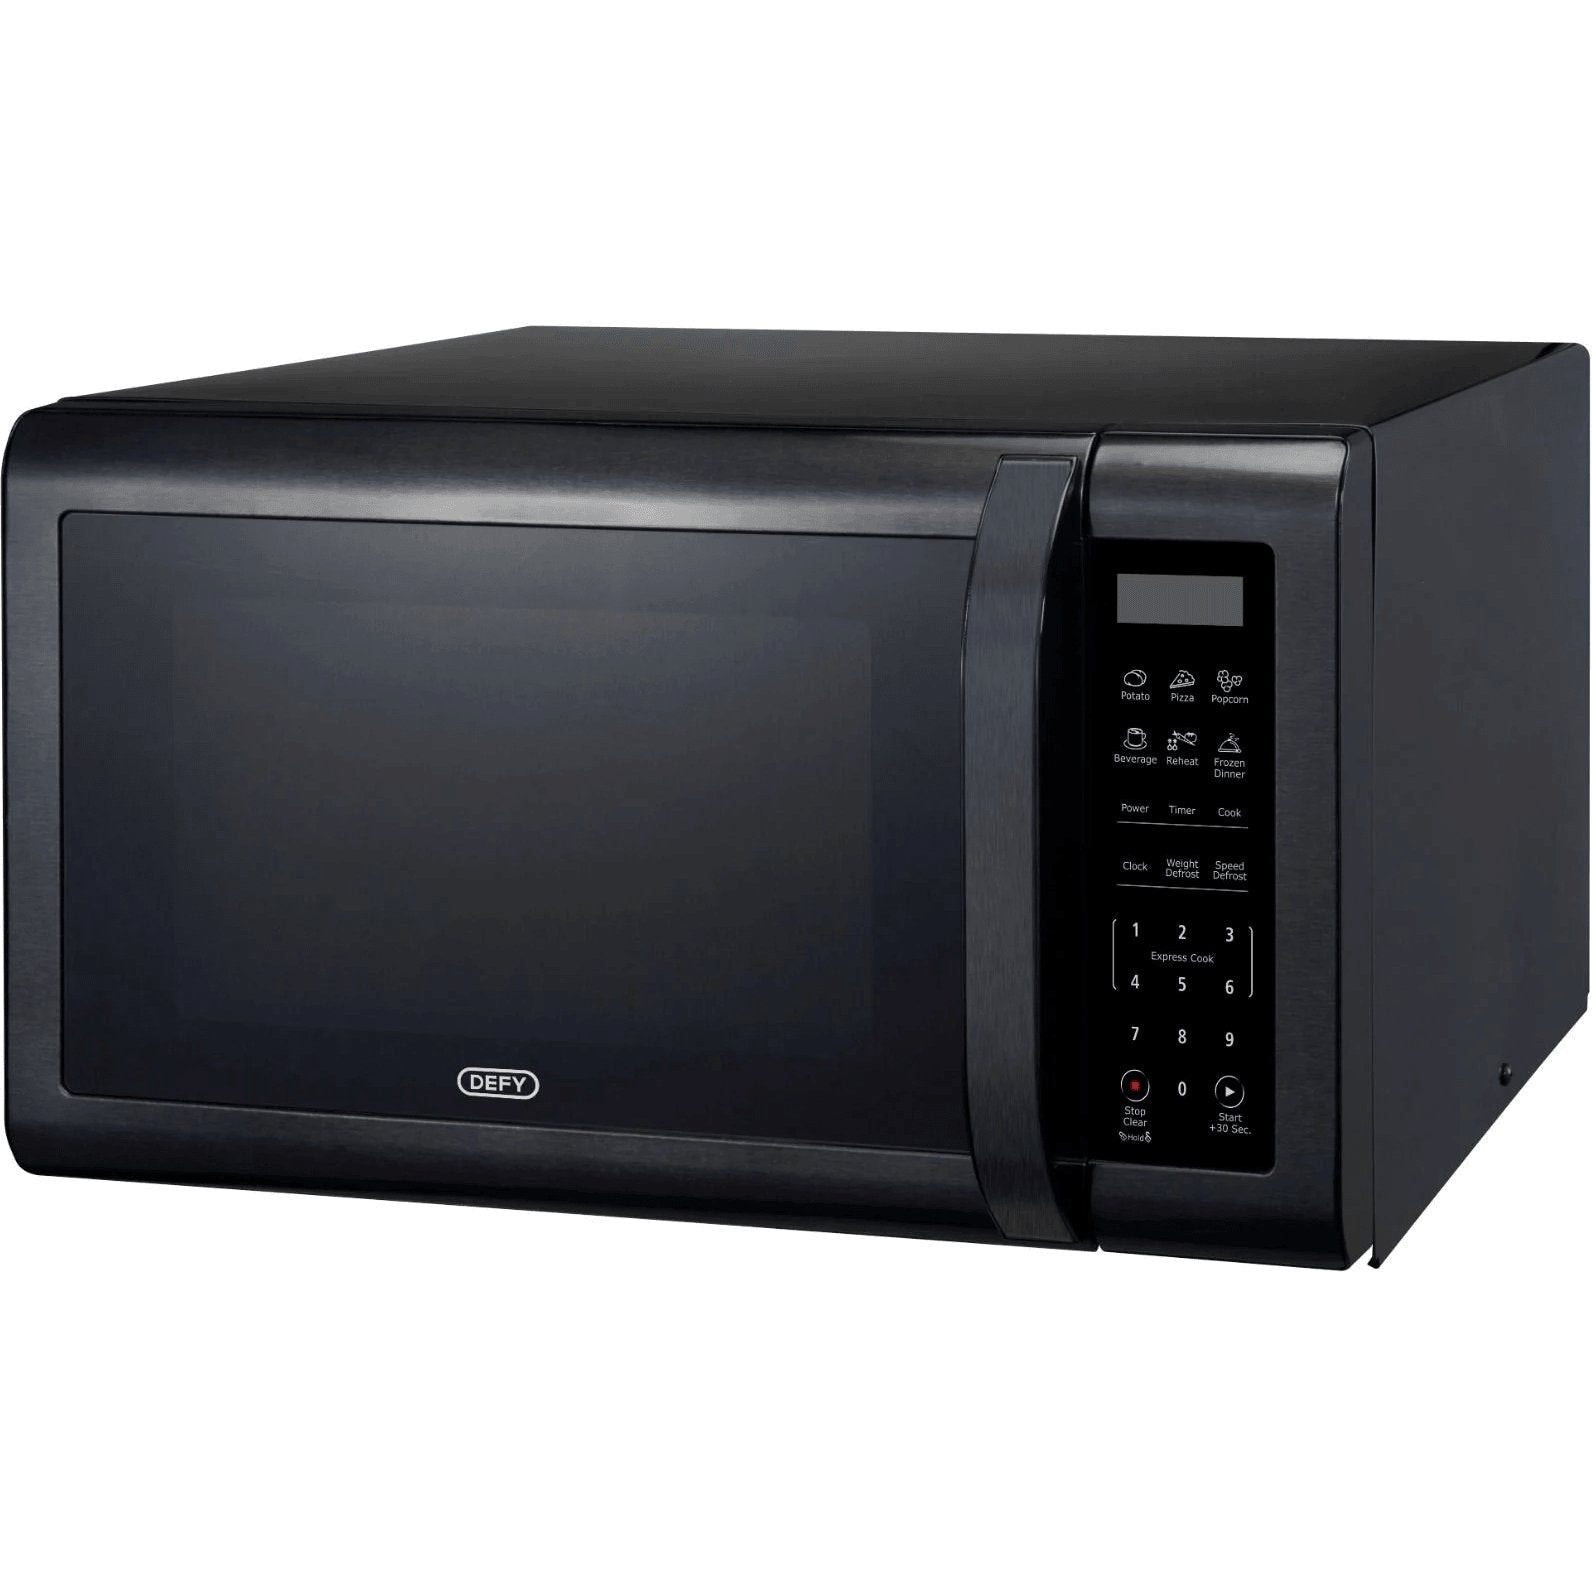 Defy DMO401 43L Microwave Oven - New World